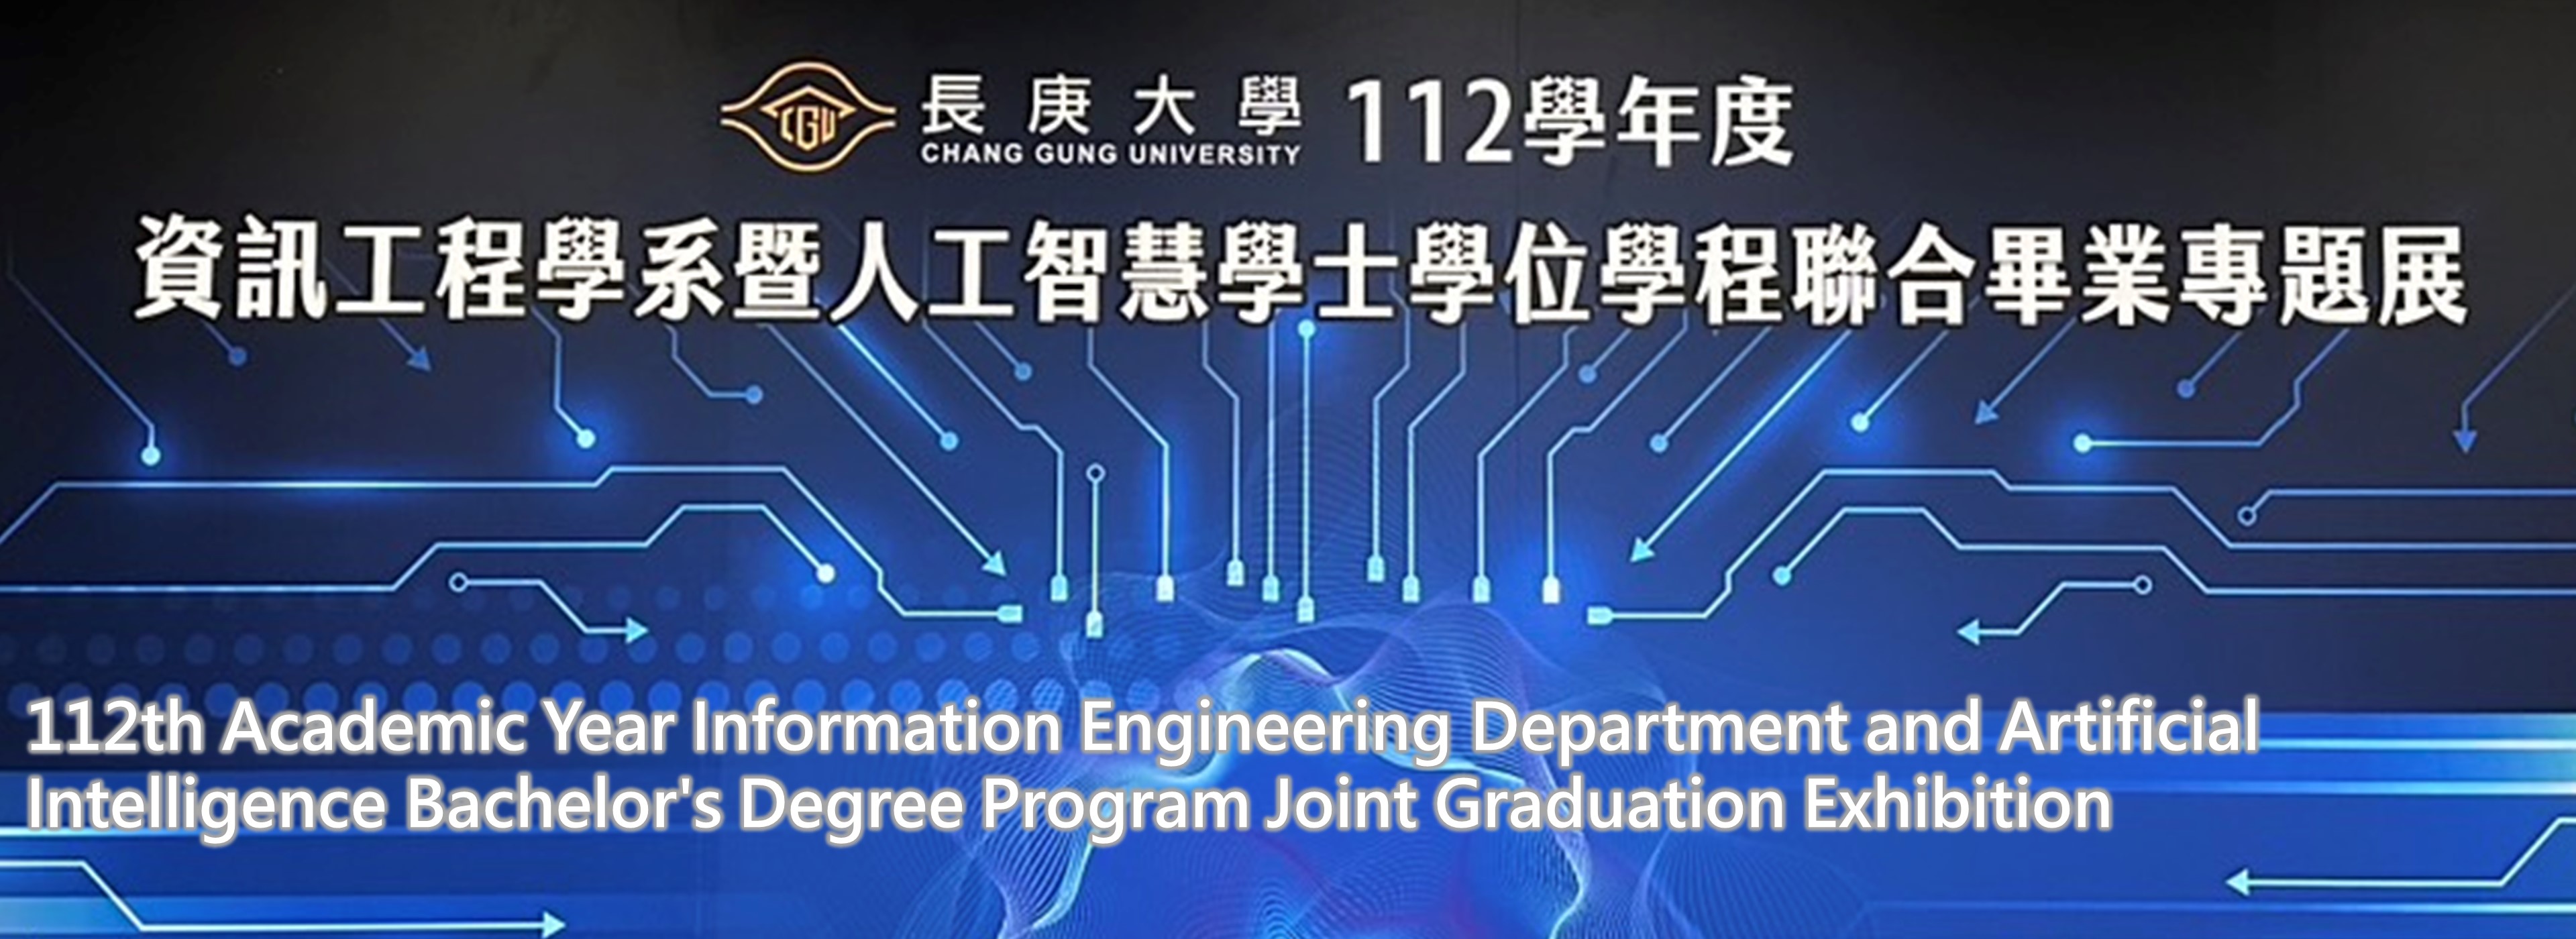 112th Academic Year Information Engineering Department and Artificial Intelligence Bachelor's Degree Program Joint Graduation Exhibition